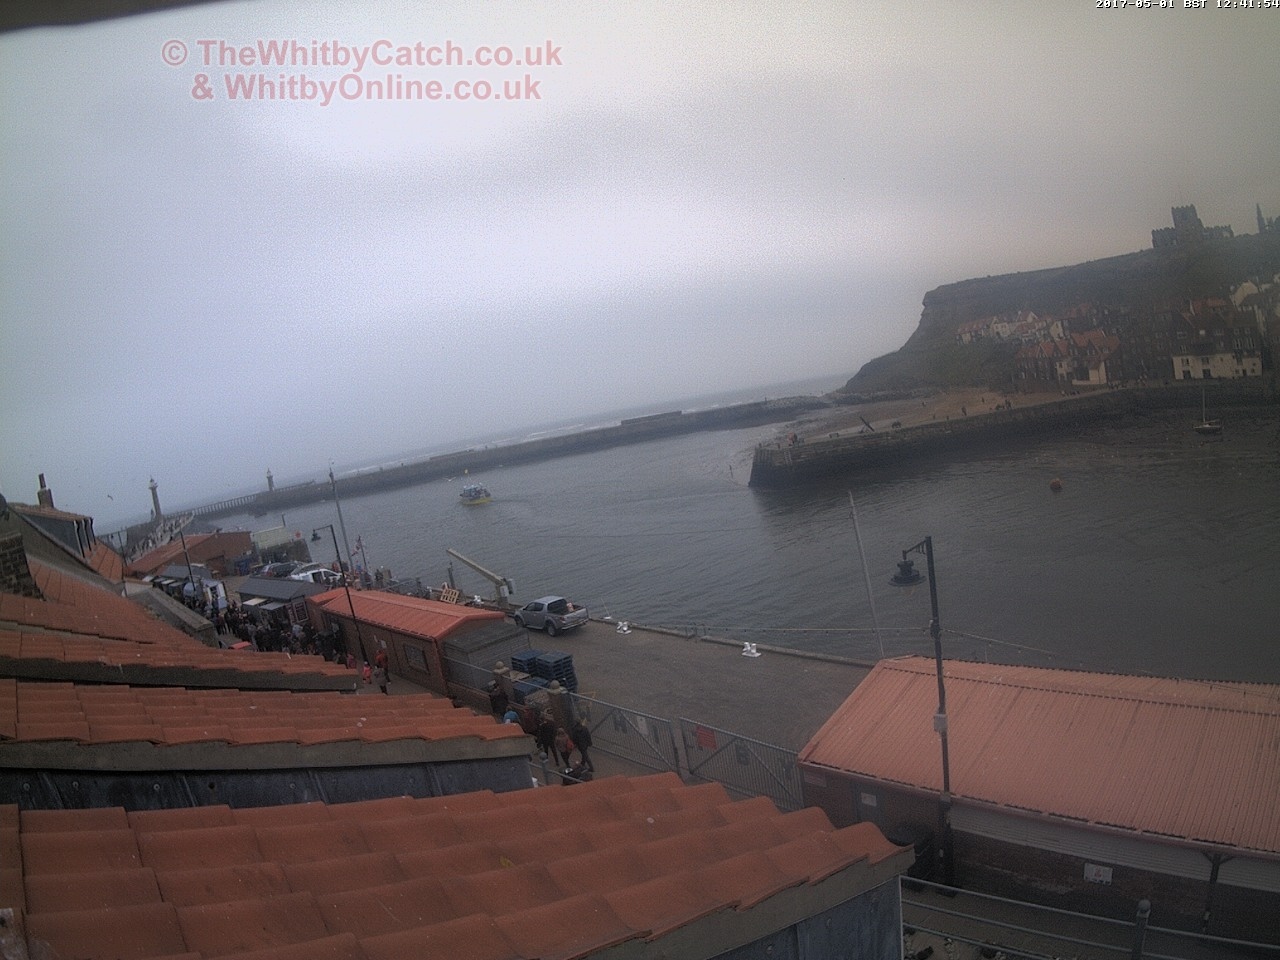 Whitby Mon 1st May 2017 12:42.